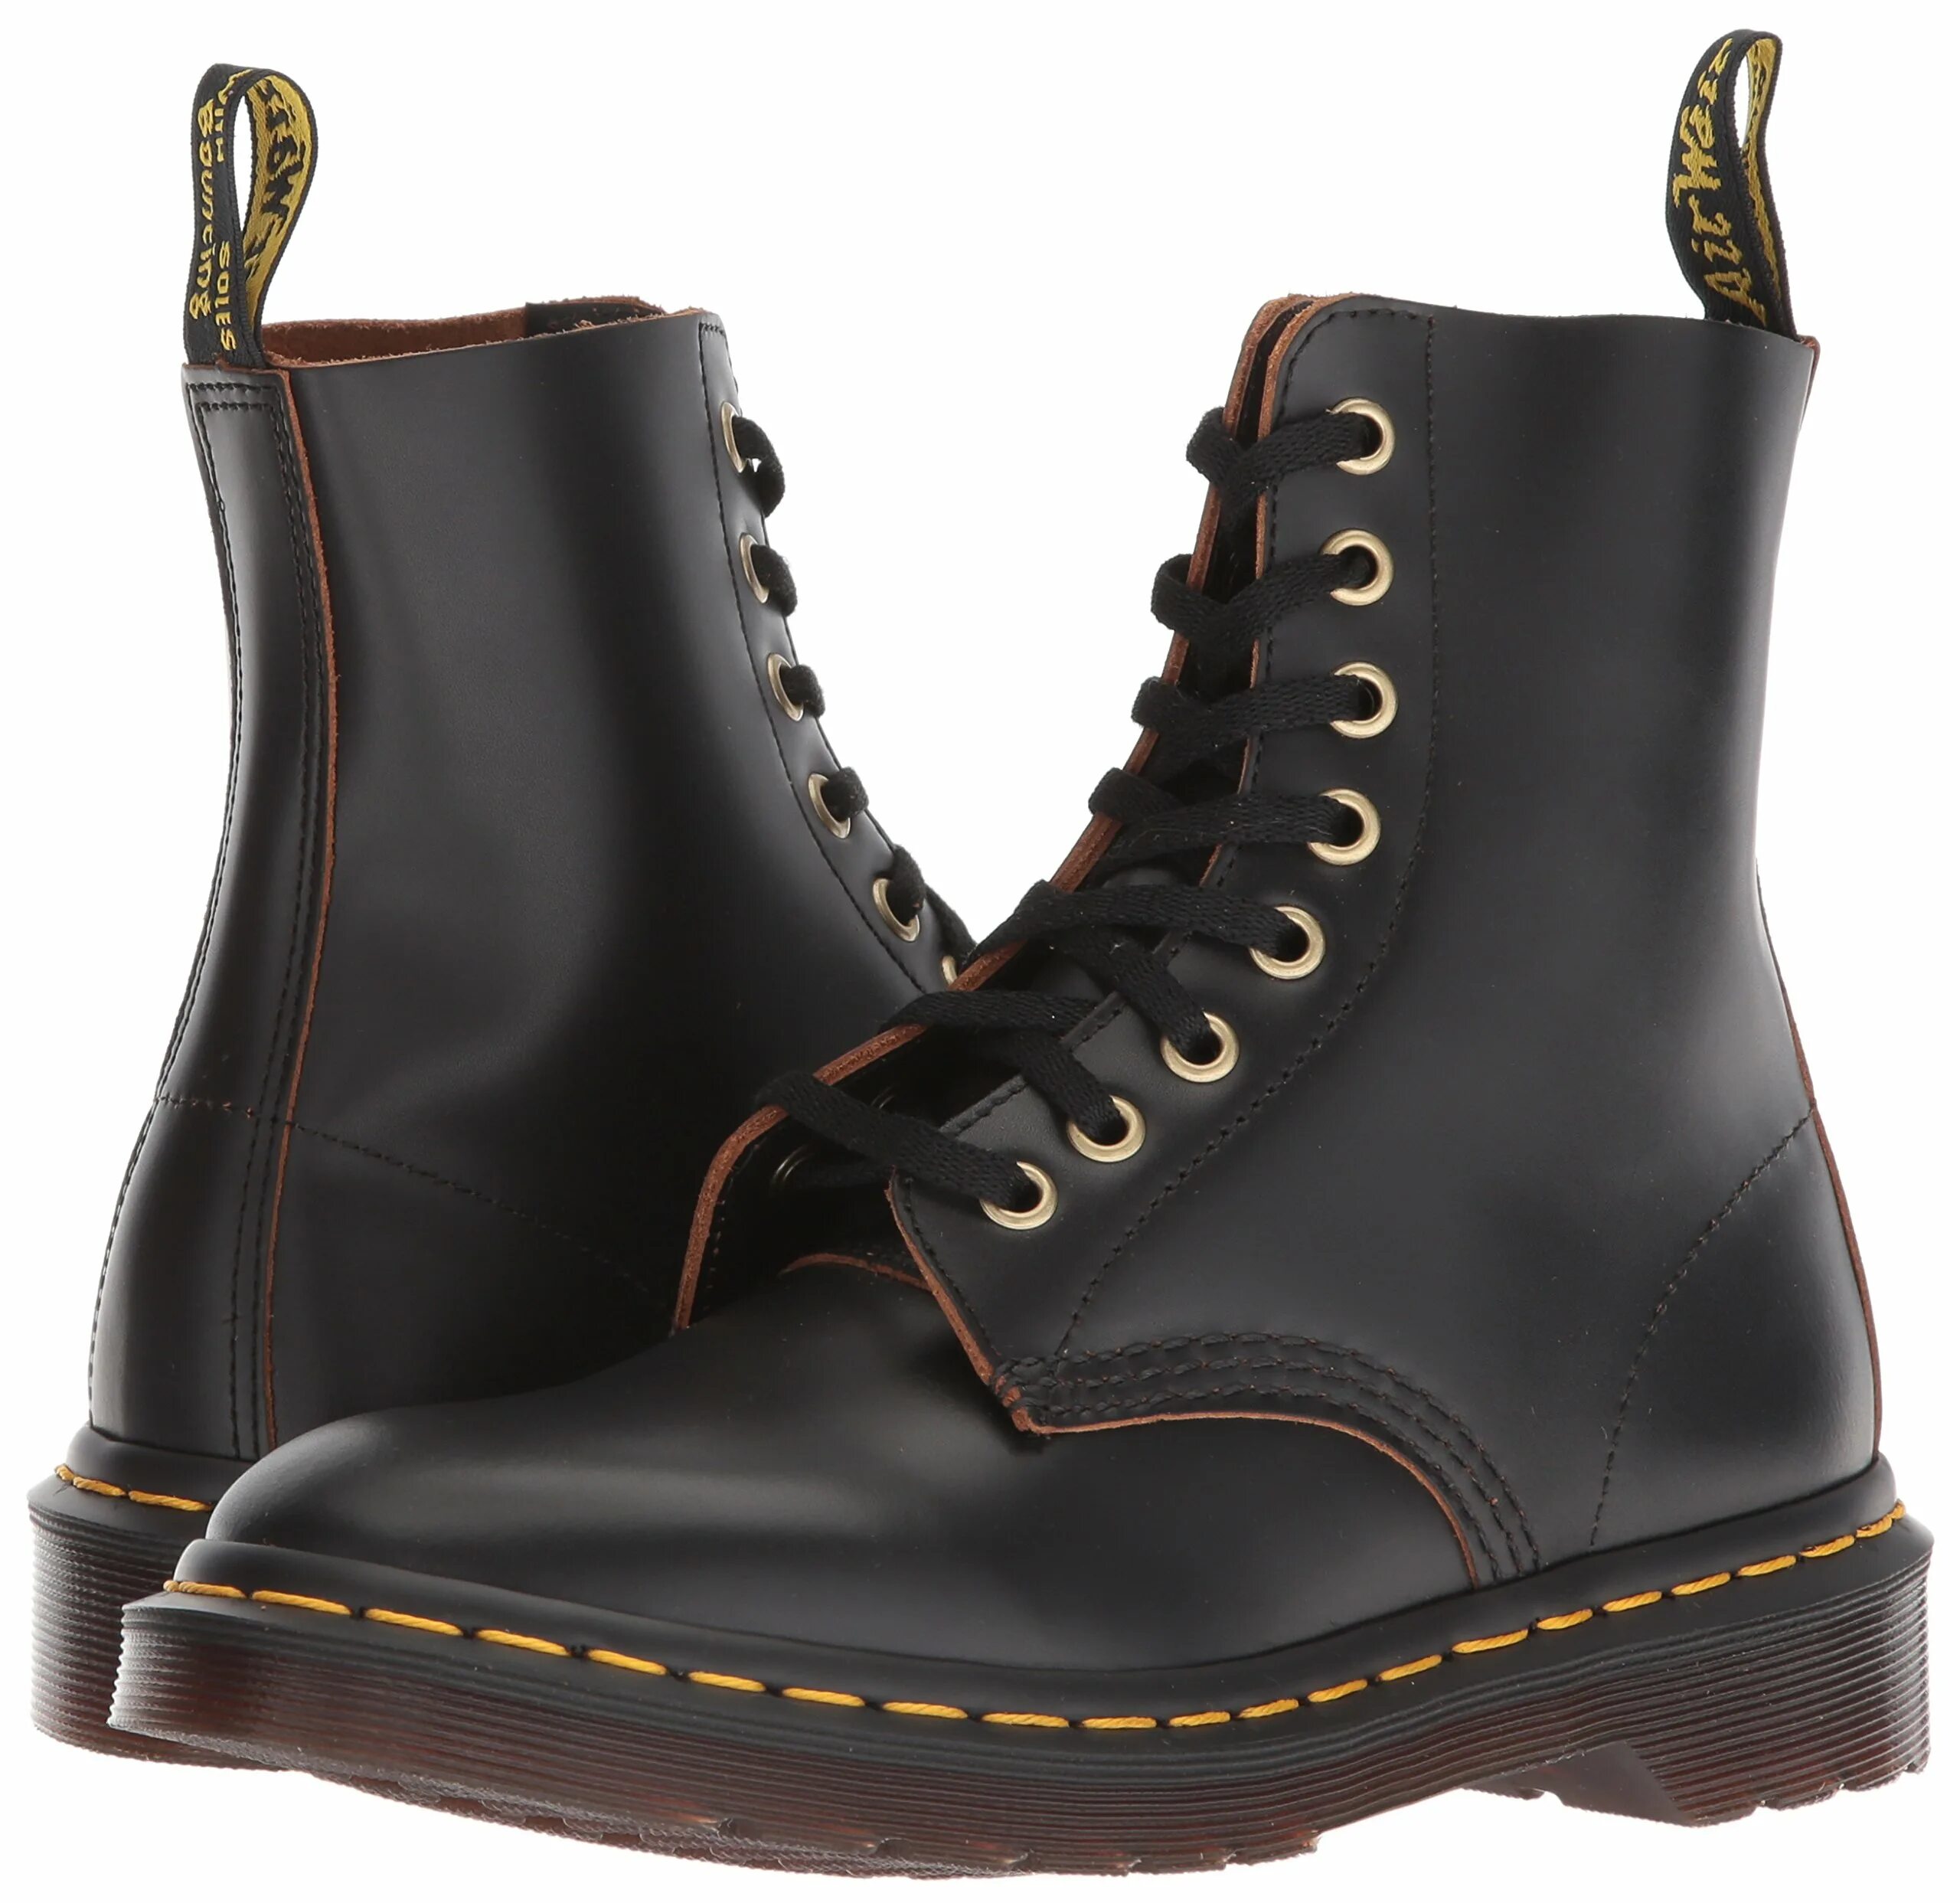 Dr Martens Antique Temperley 1460. Dr Martens 1460 Pascal подошва. Dr.Martens 1416 Pascal. Dr. Marten’s 1460 Vintage smooth Leather Lace up Boots.. Dr pascal